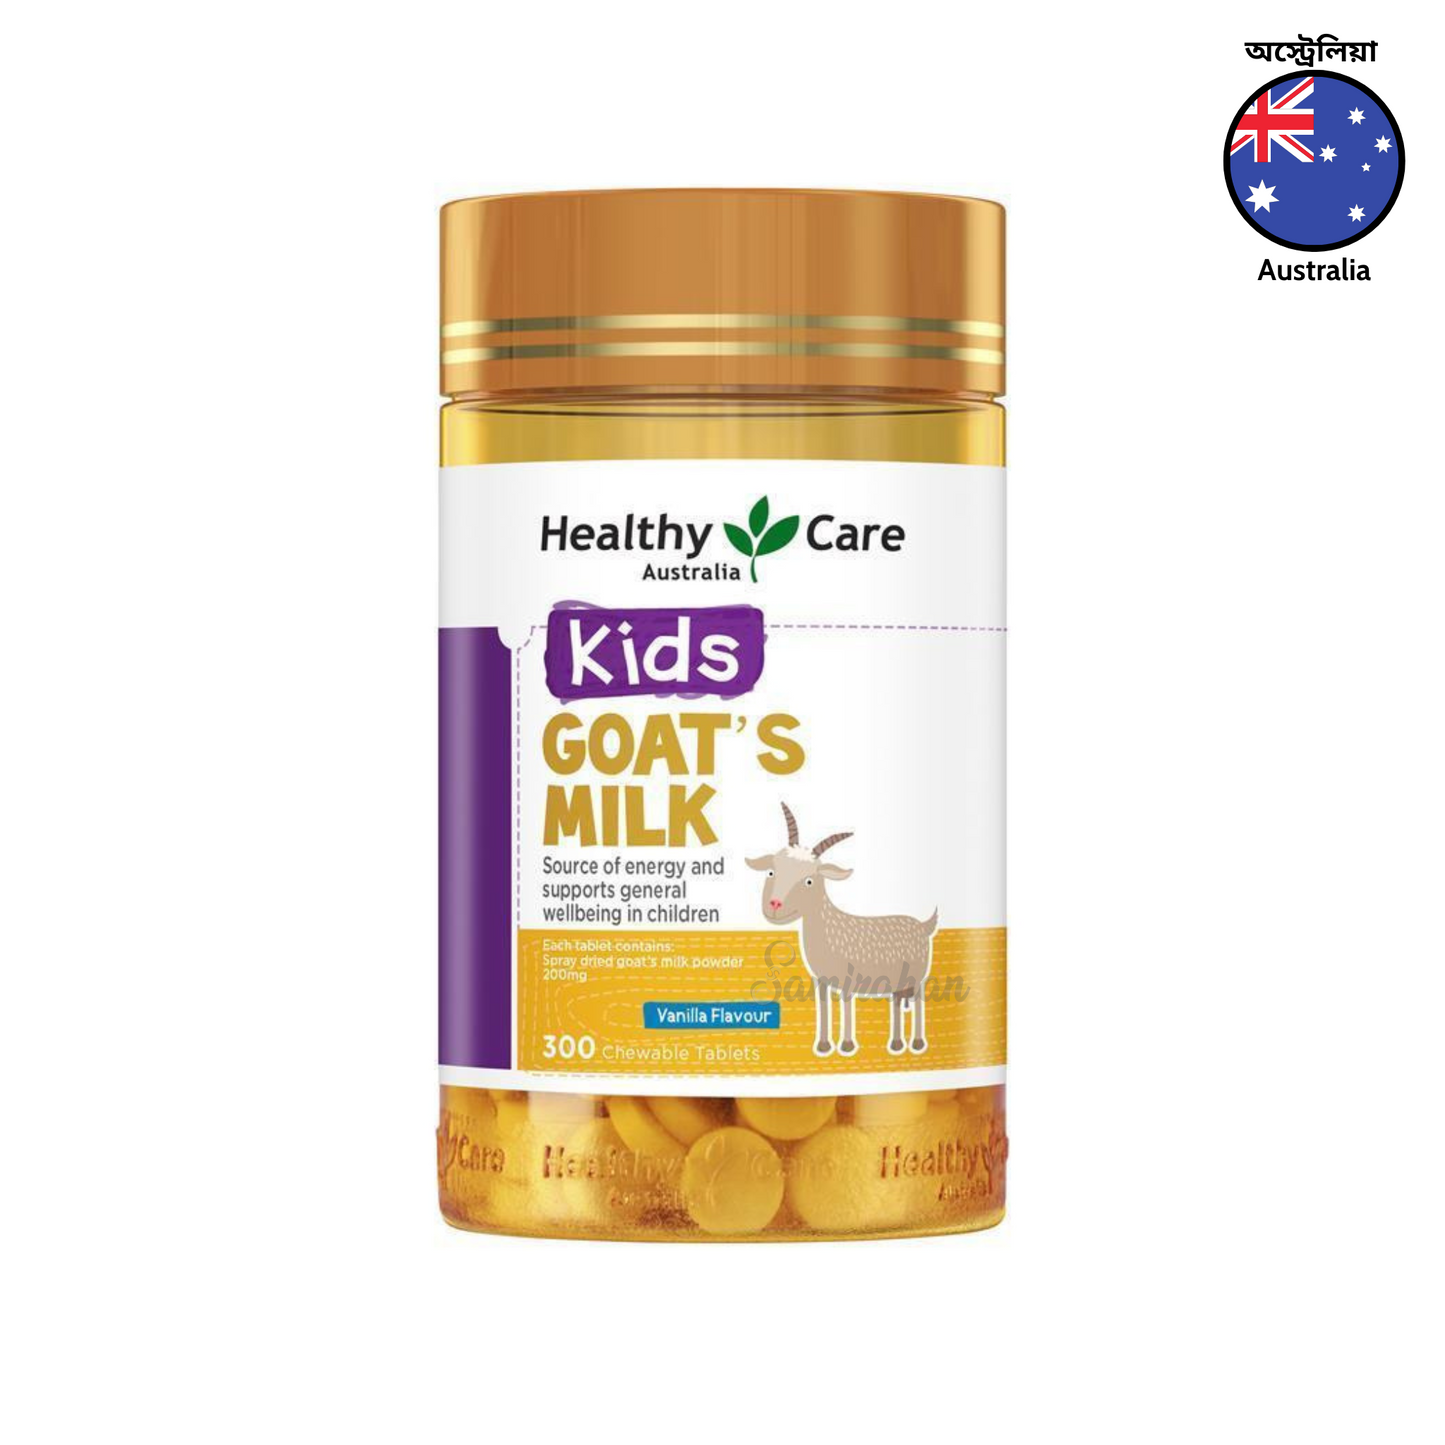 Healthy Care Goat's Milk for Kids Vanilla 300 Chewable Tablets